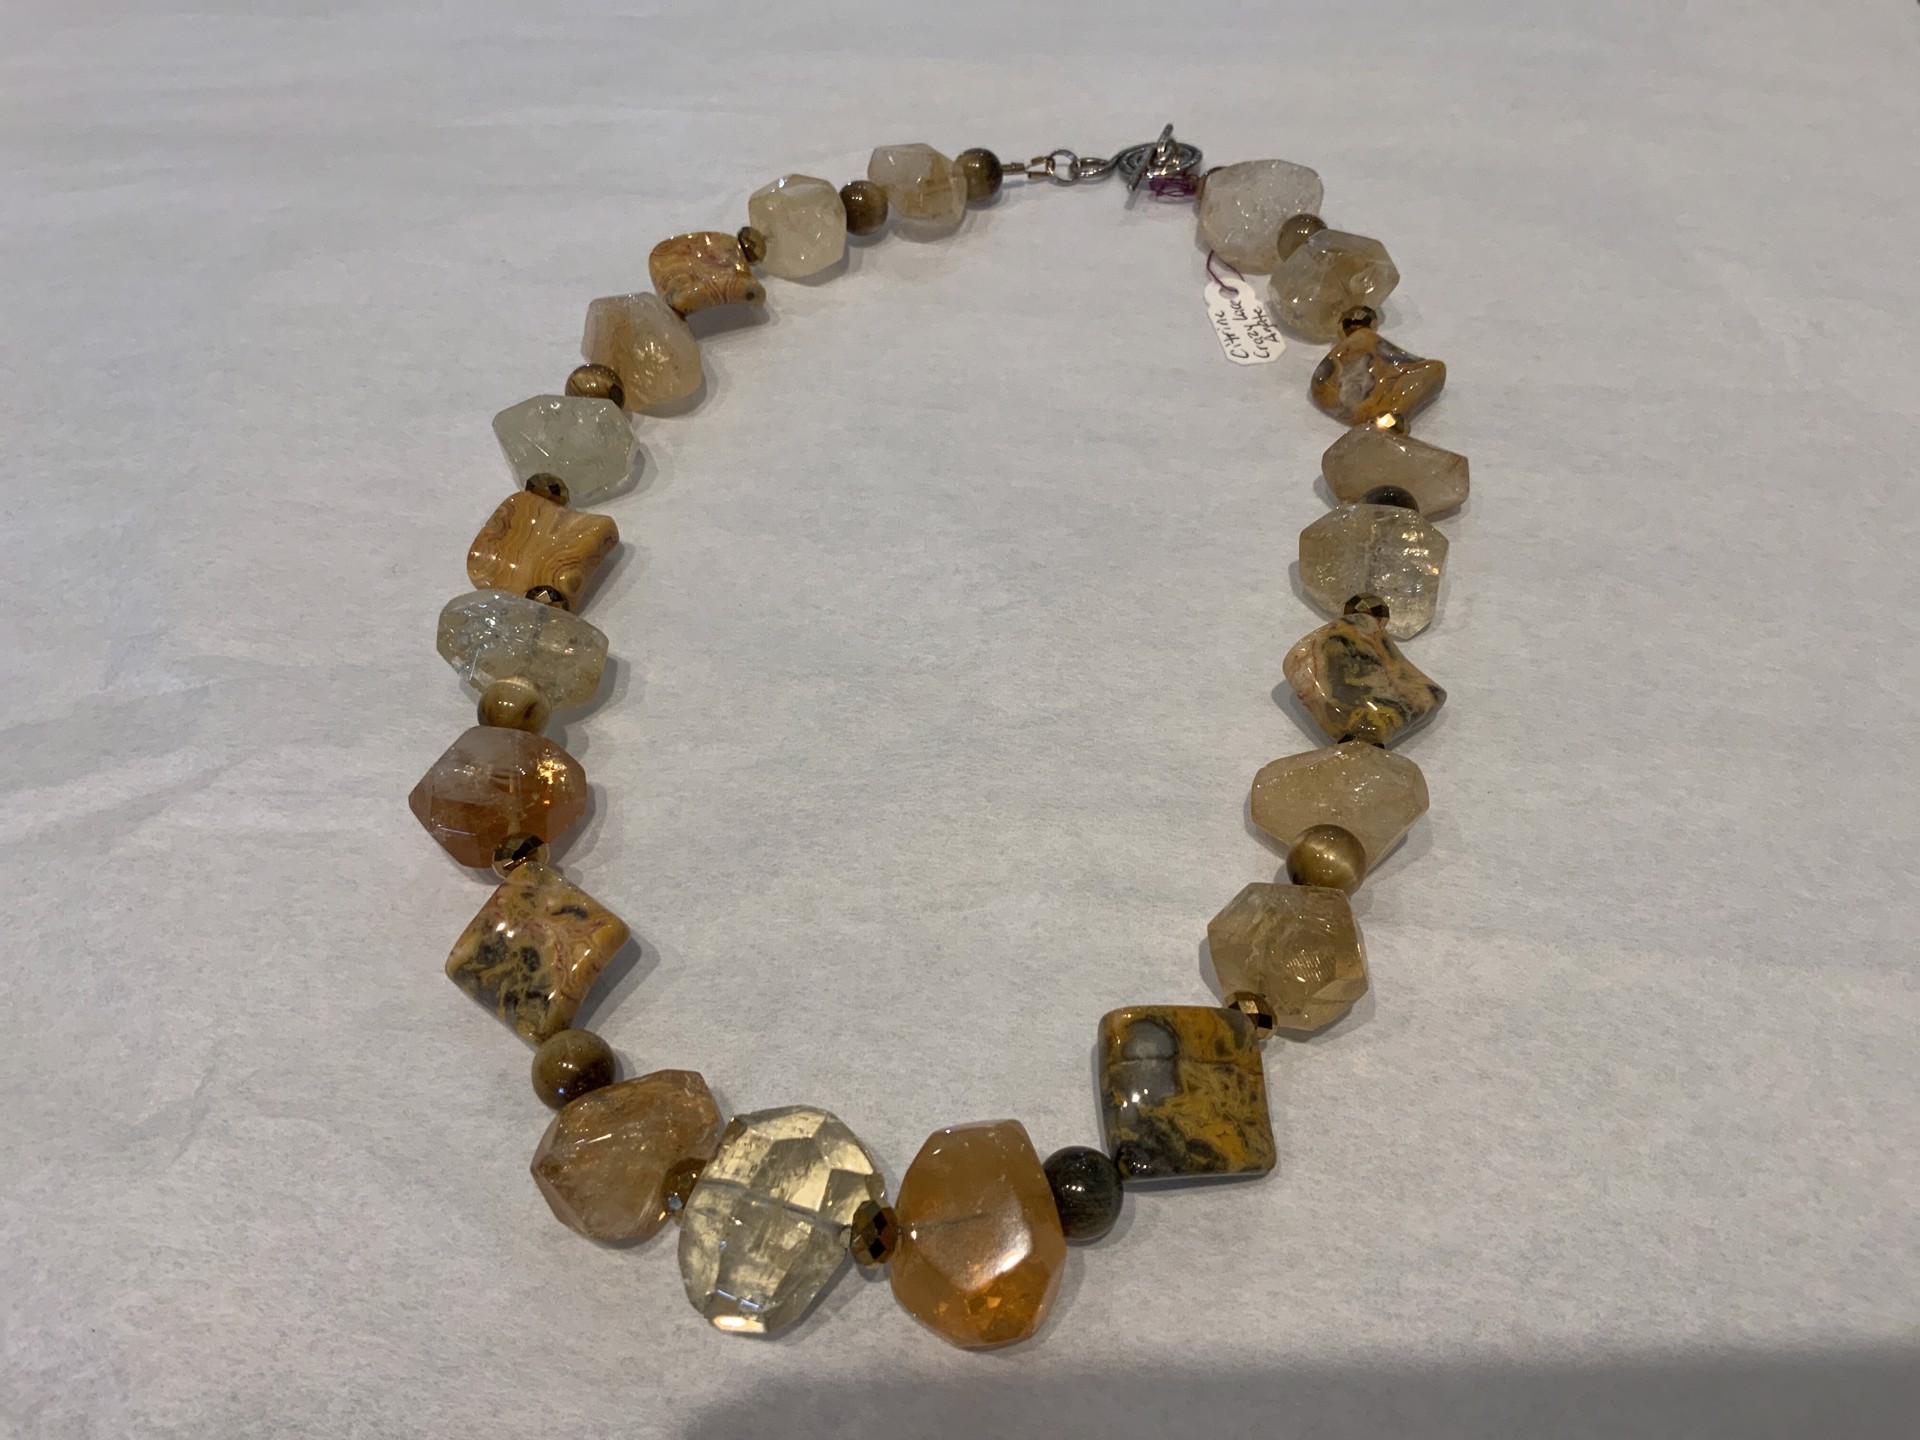 Citrine and Crazy Lace Agate Necklace by Anissa Roland